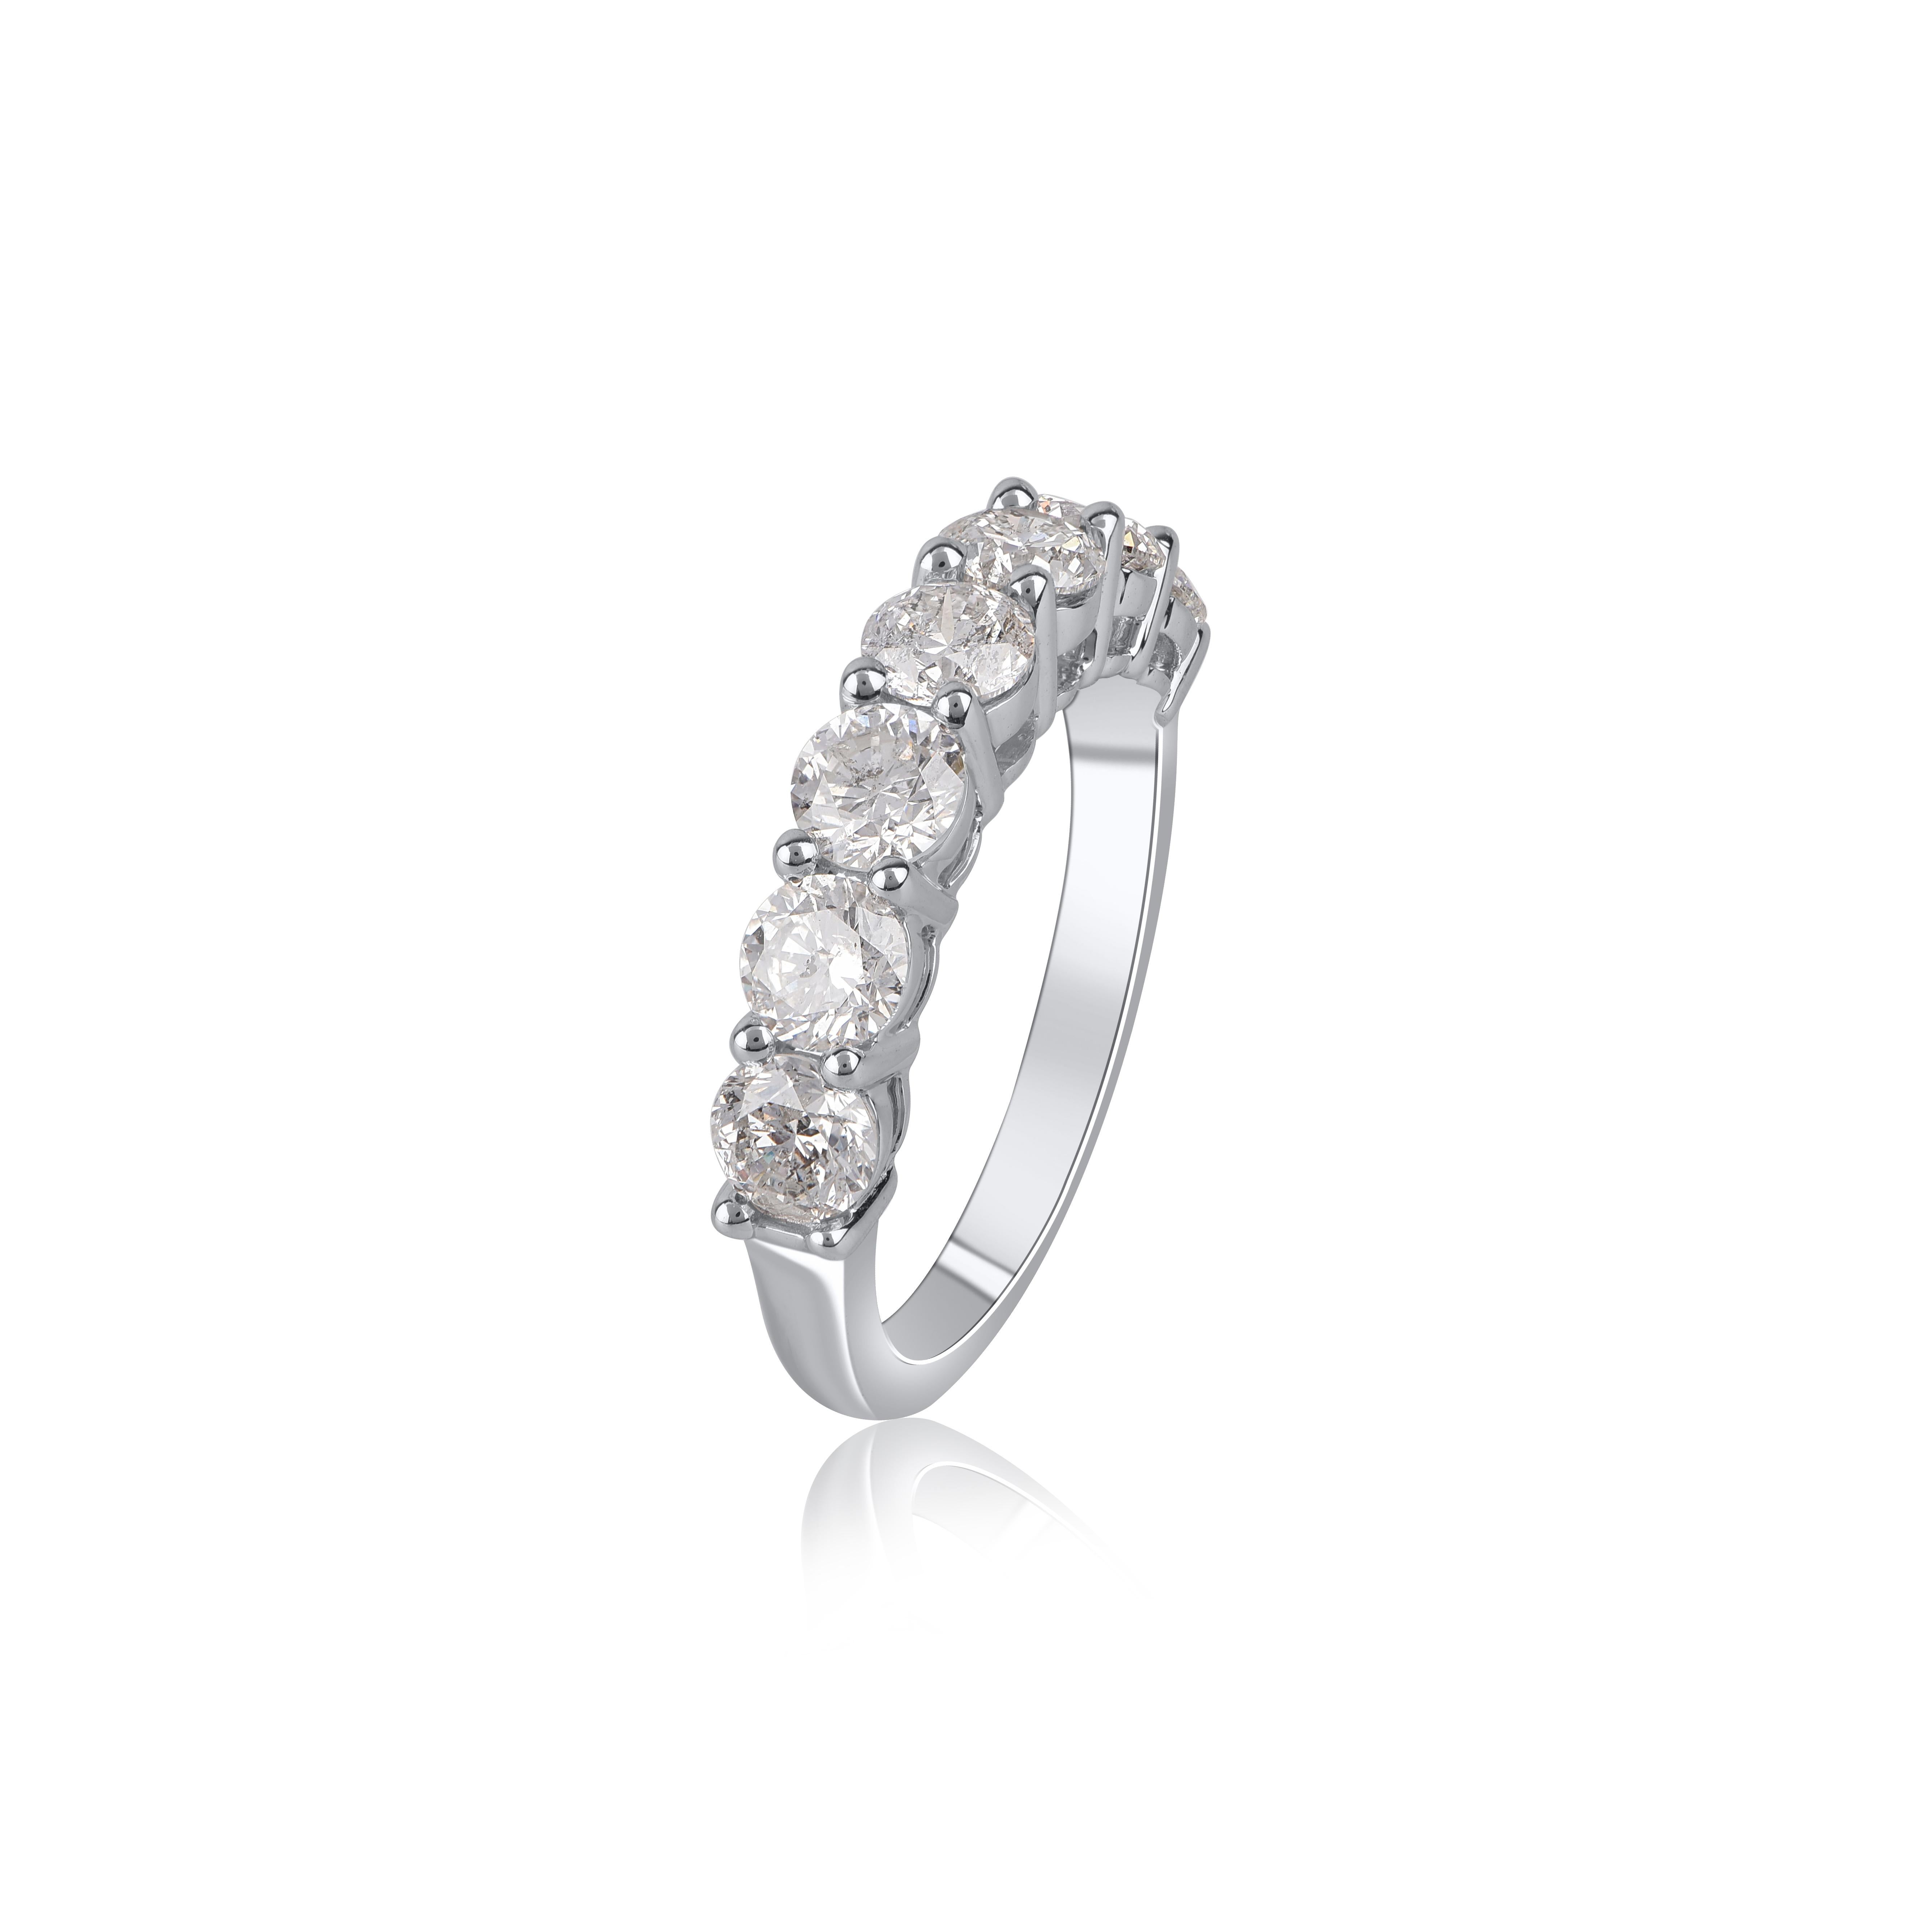 Crafted in 14 kt white gold and sparkling with 7 round-cut diamonds elegantly set in prong setting. The diamonds are graded H-I Color, I1 Clarity. This scintillating diamond wedding half eternity band will surely stand out. This ring will arrive in